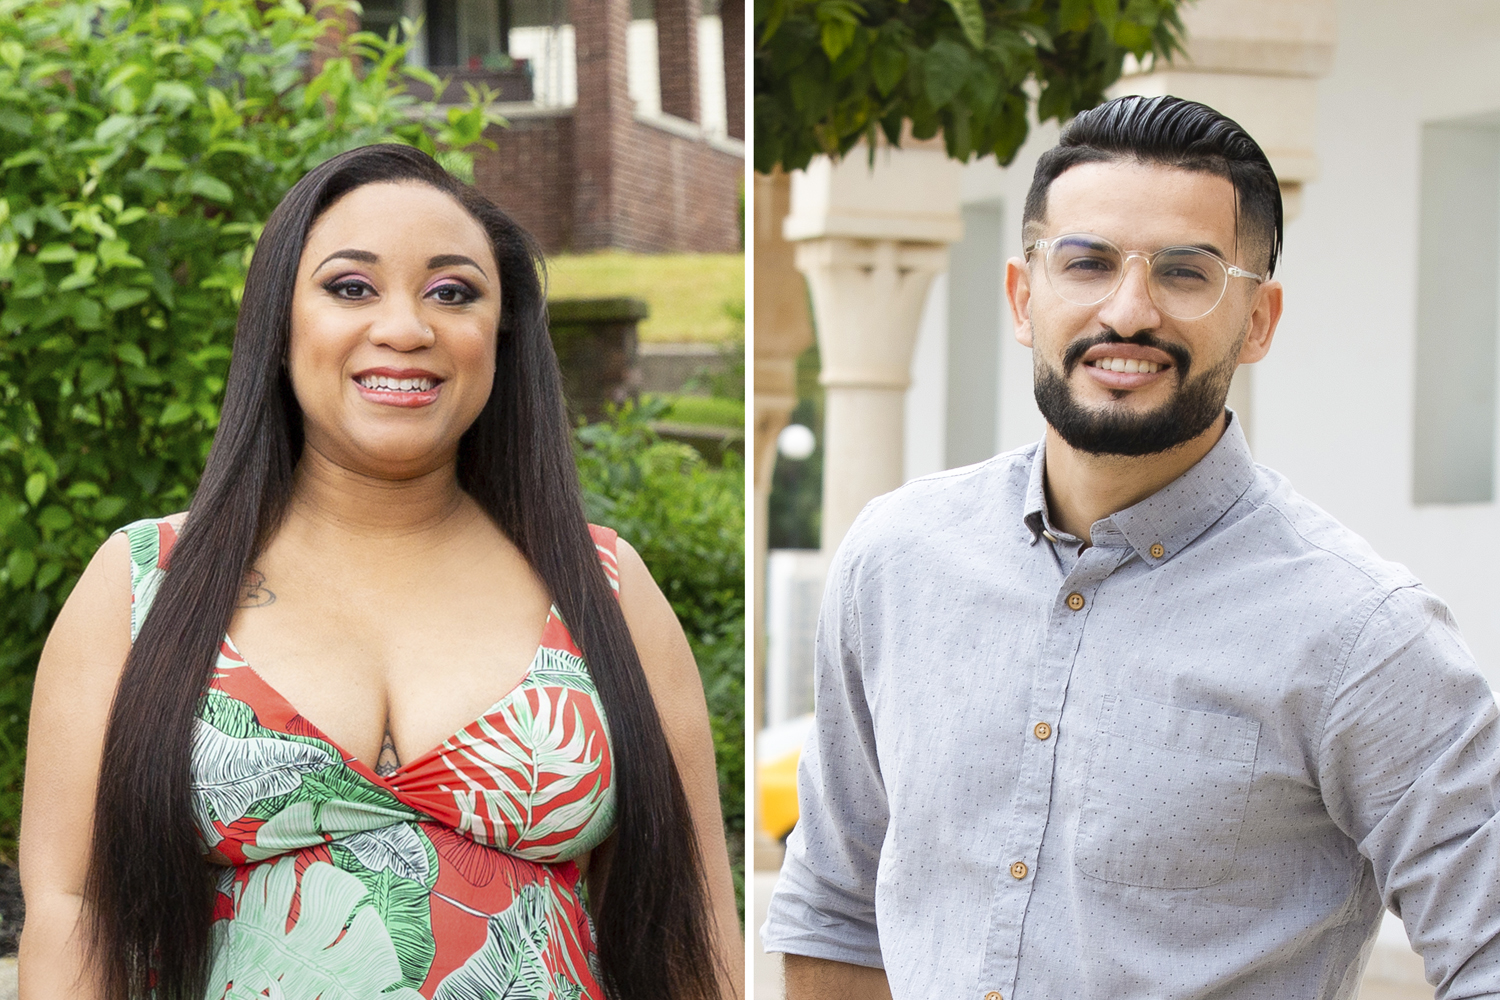 One of the '90 Day Fiancé: Before the 90 Days' Season 5 couples, Memphis and Hamza seen here in a floral dress and a button down shirt.